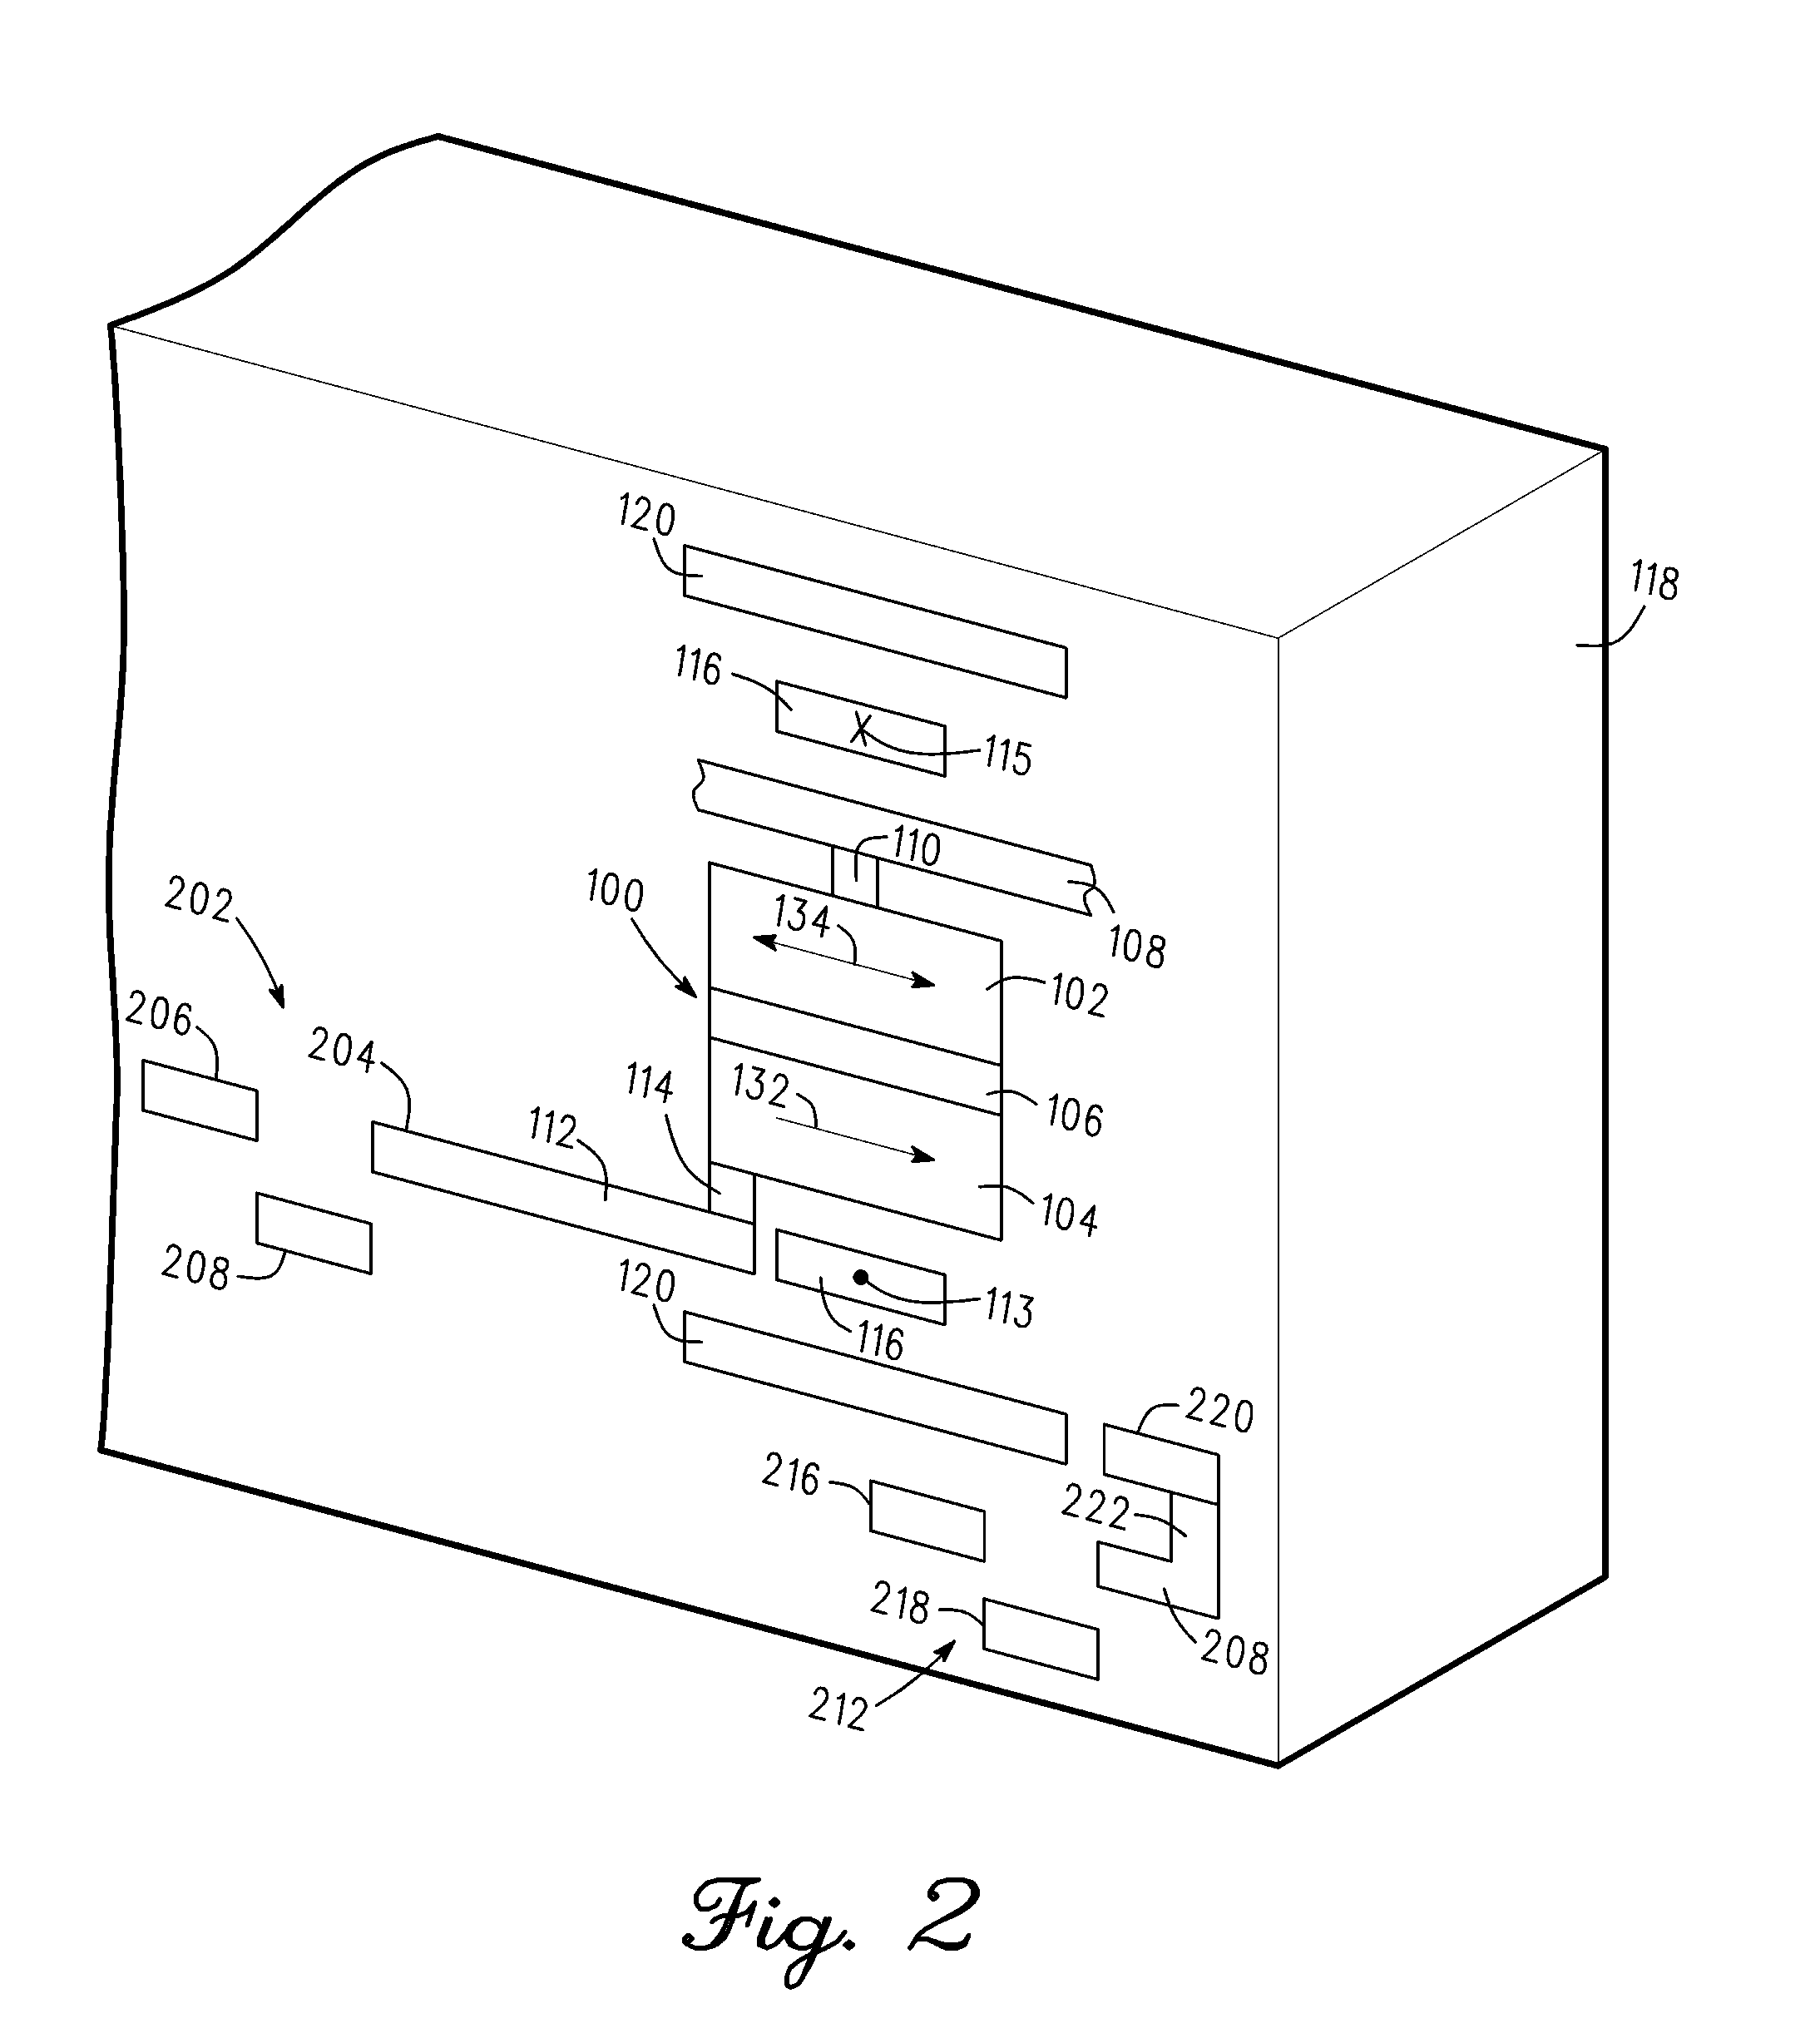 Method and structure for testing and calibrating magnetic field sensing device